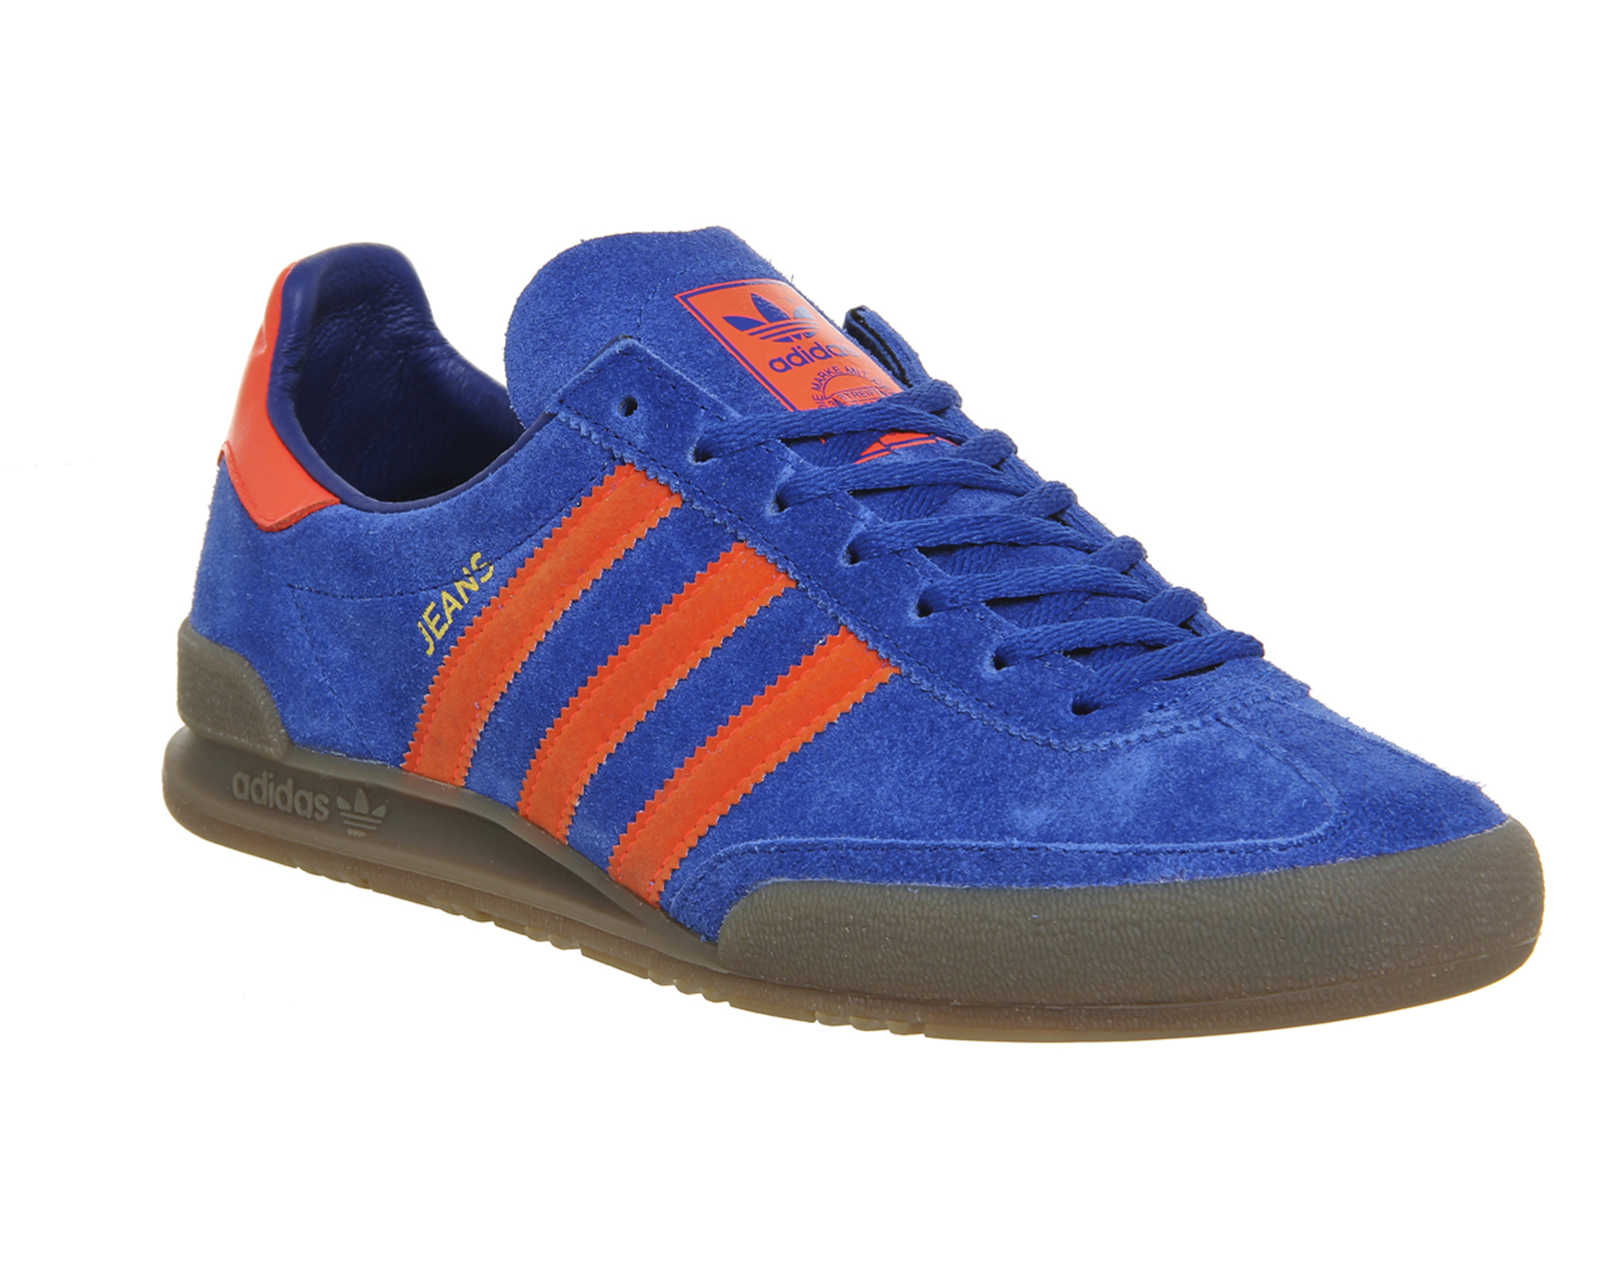 adidas jeans trainers red